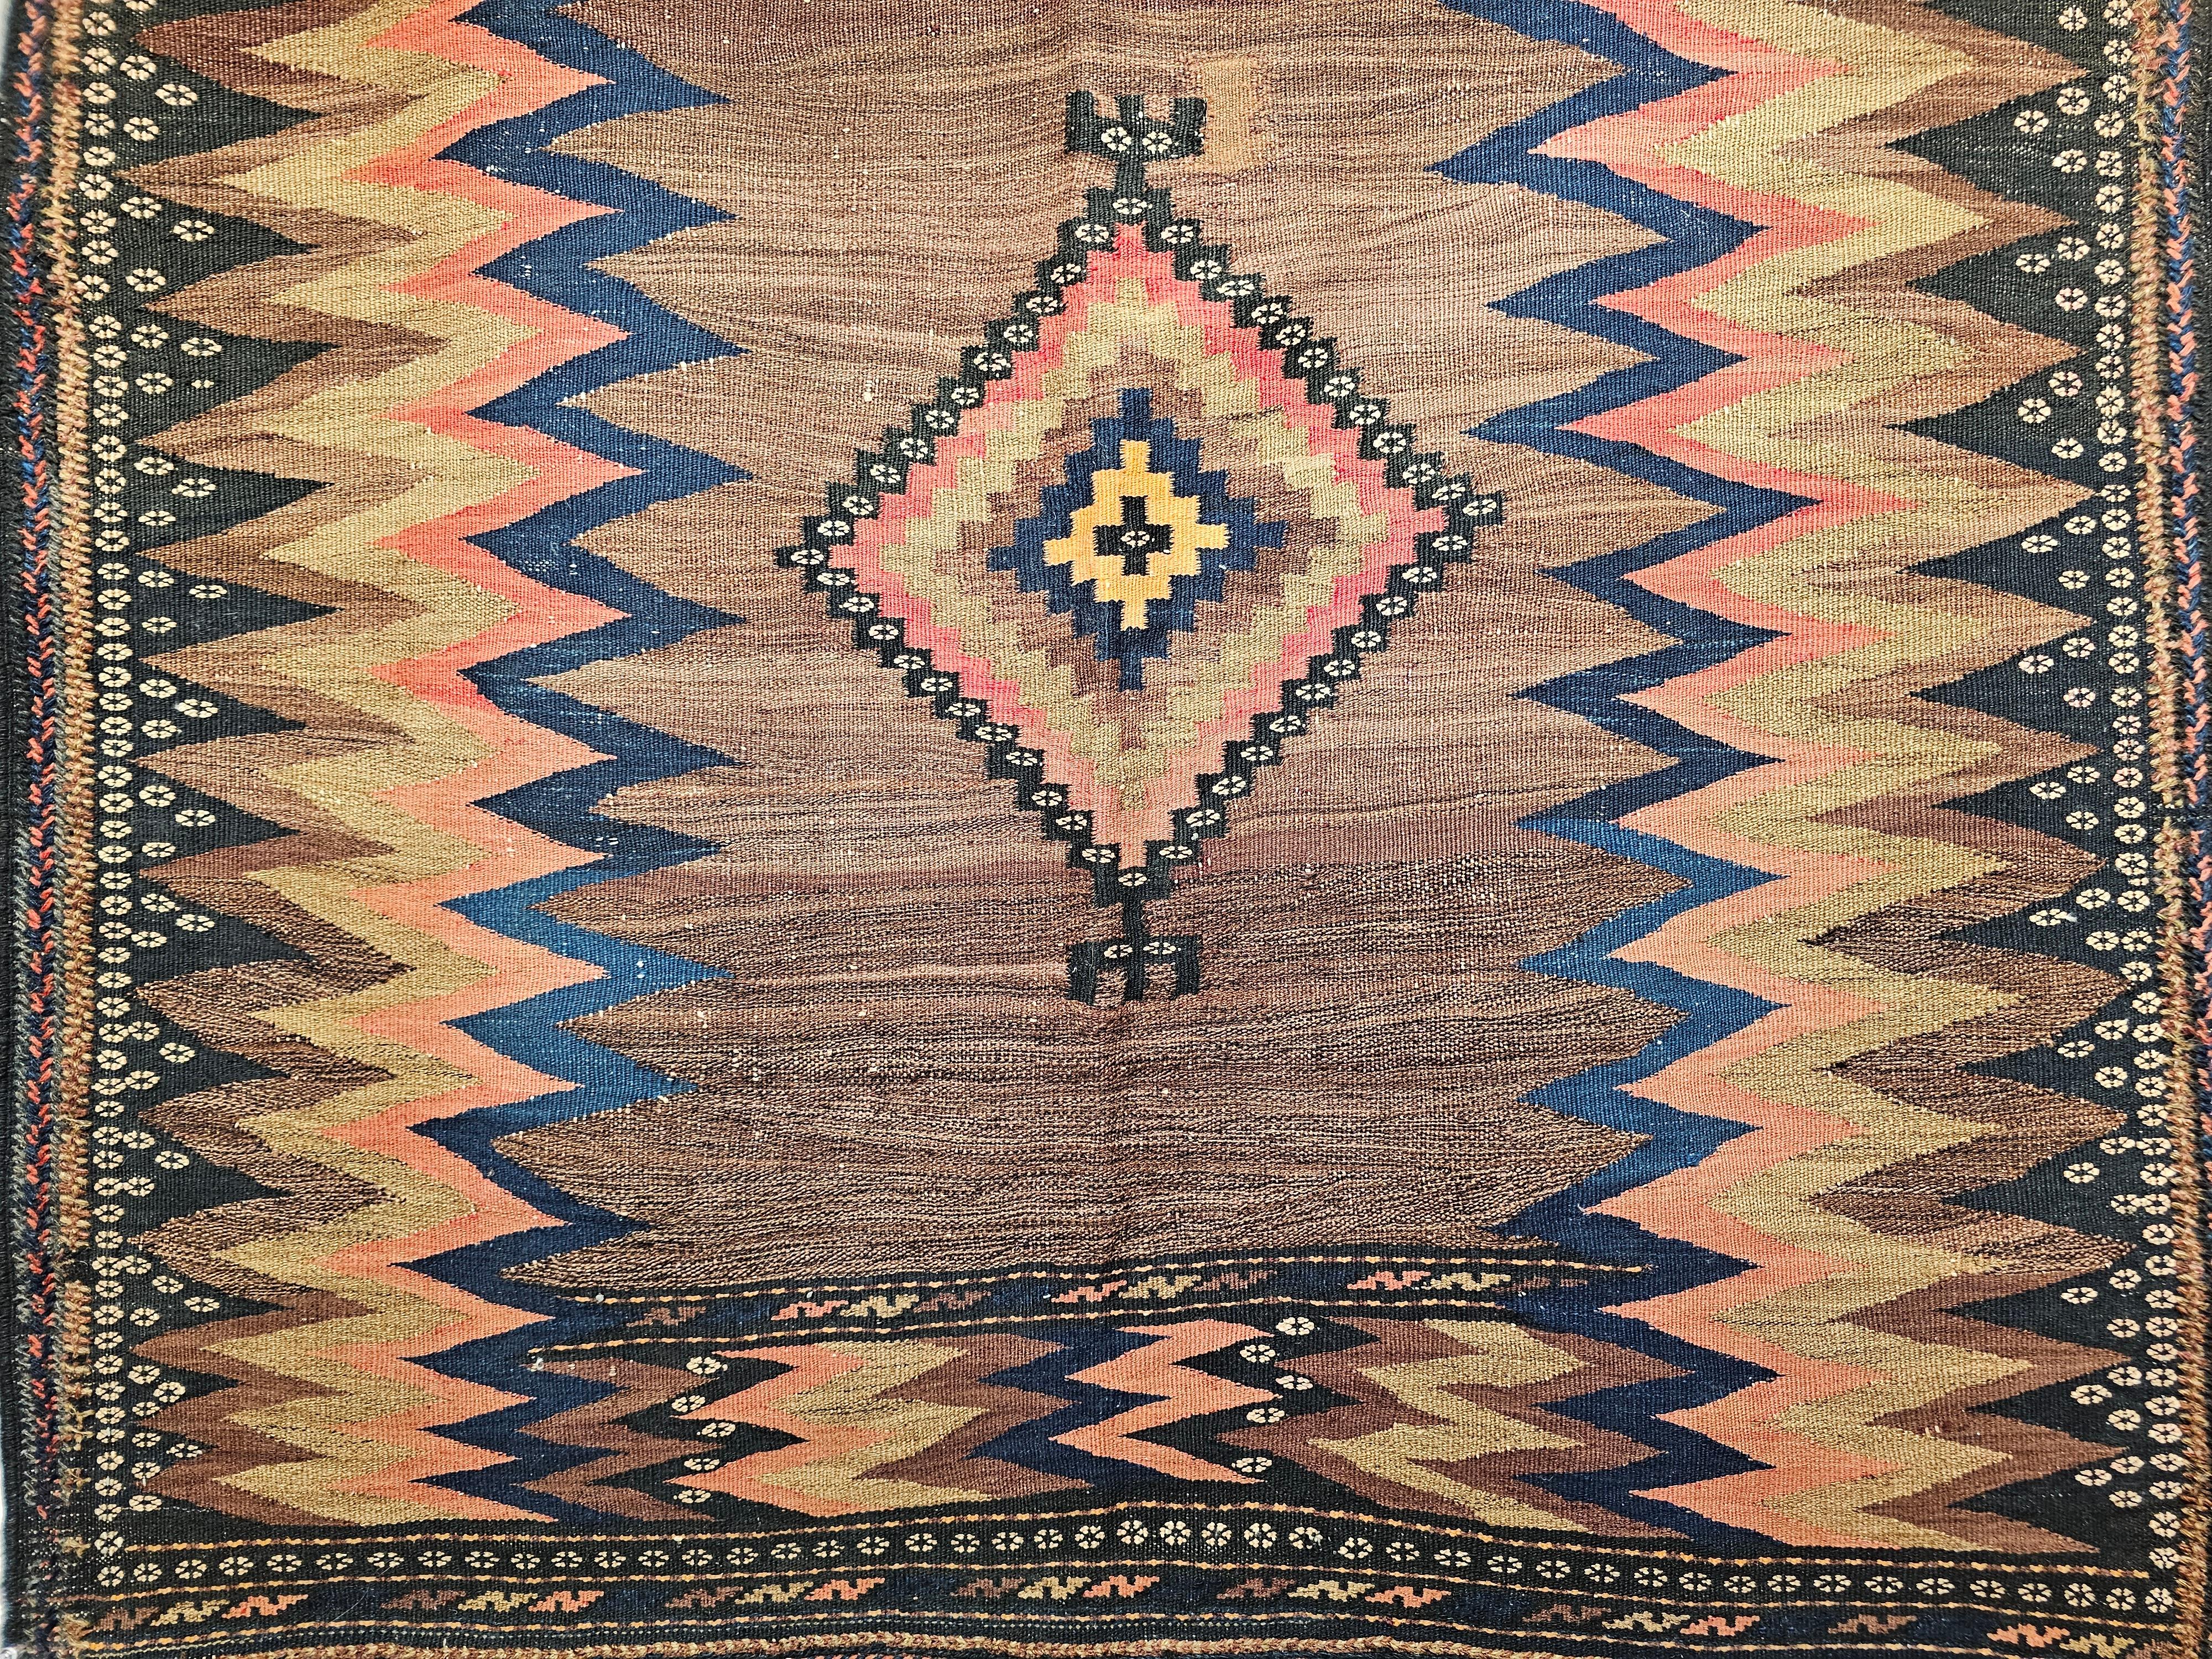 Vintage Square Size Persian Sofreh Kilim in Brown, Navy, Pink, Pale Yellow In Good Condition For Sale In Barrington, IL